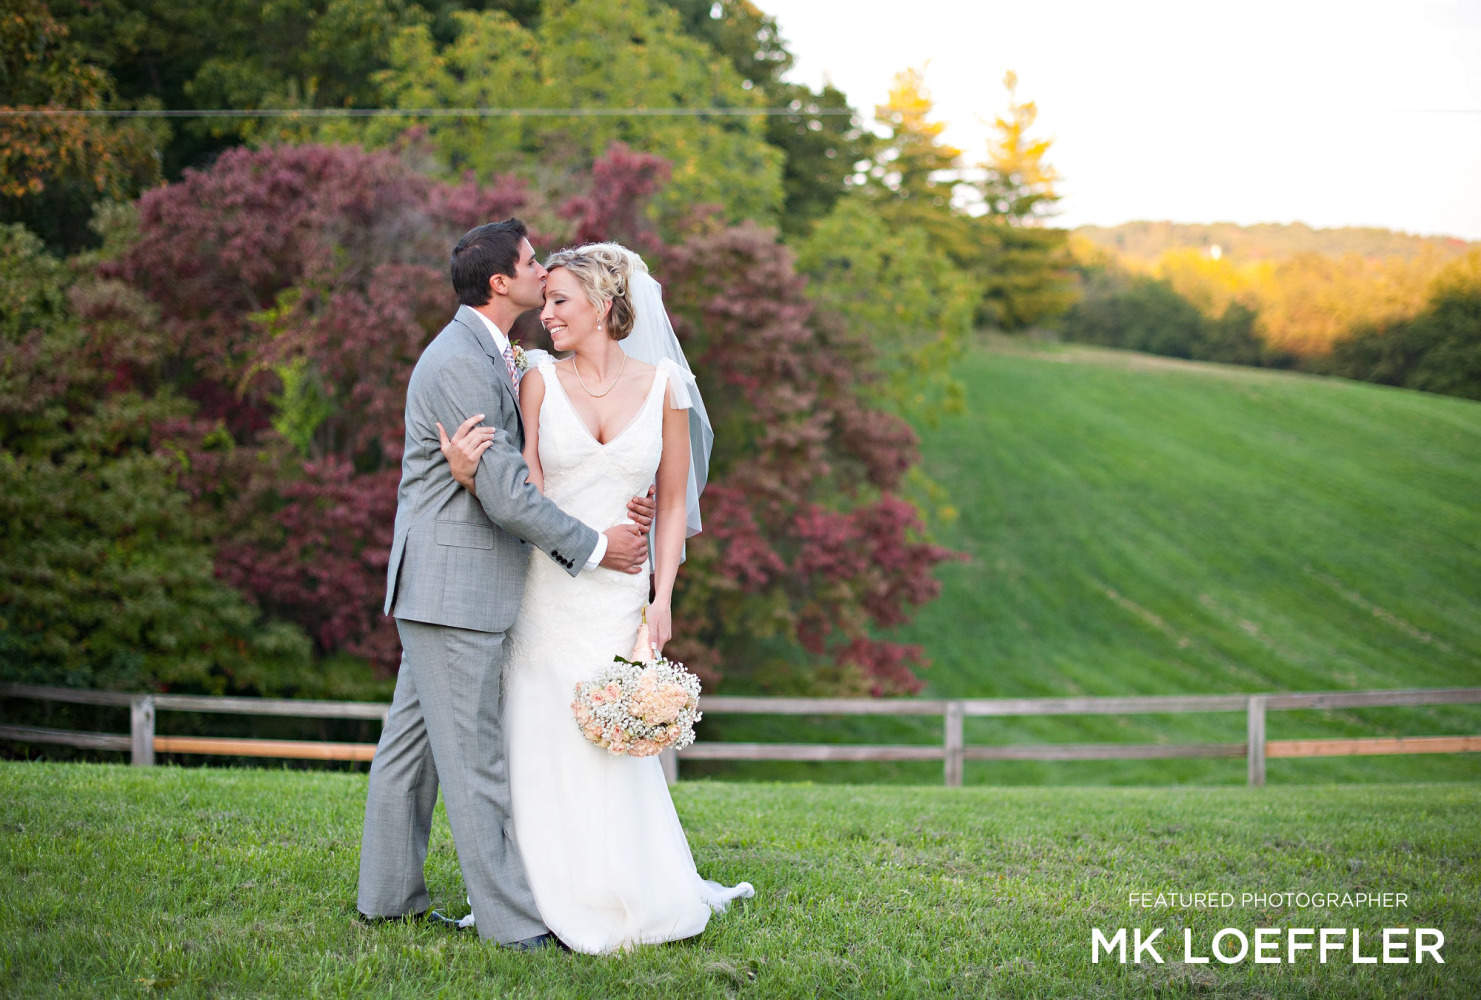 MK Photography - Featured Photographer